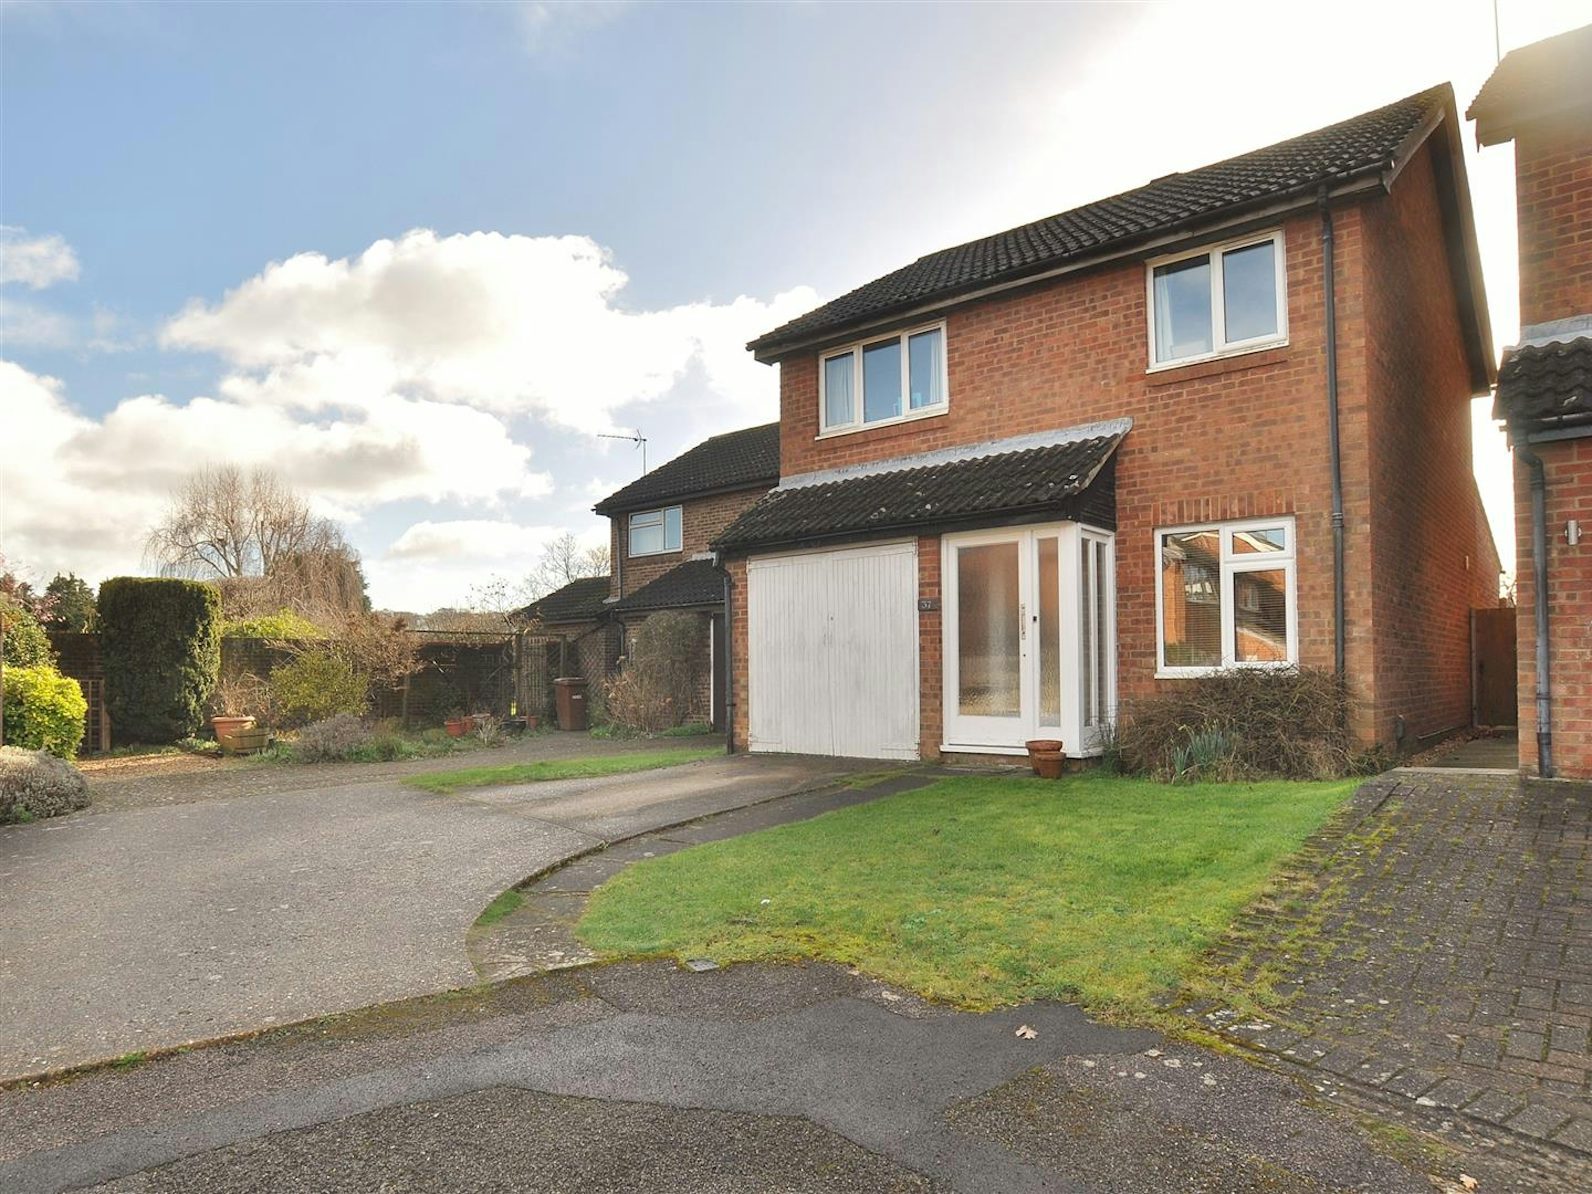 Detached house for sale on Grange Close Hitchin, SG4